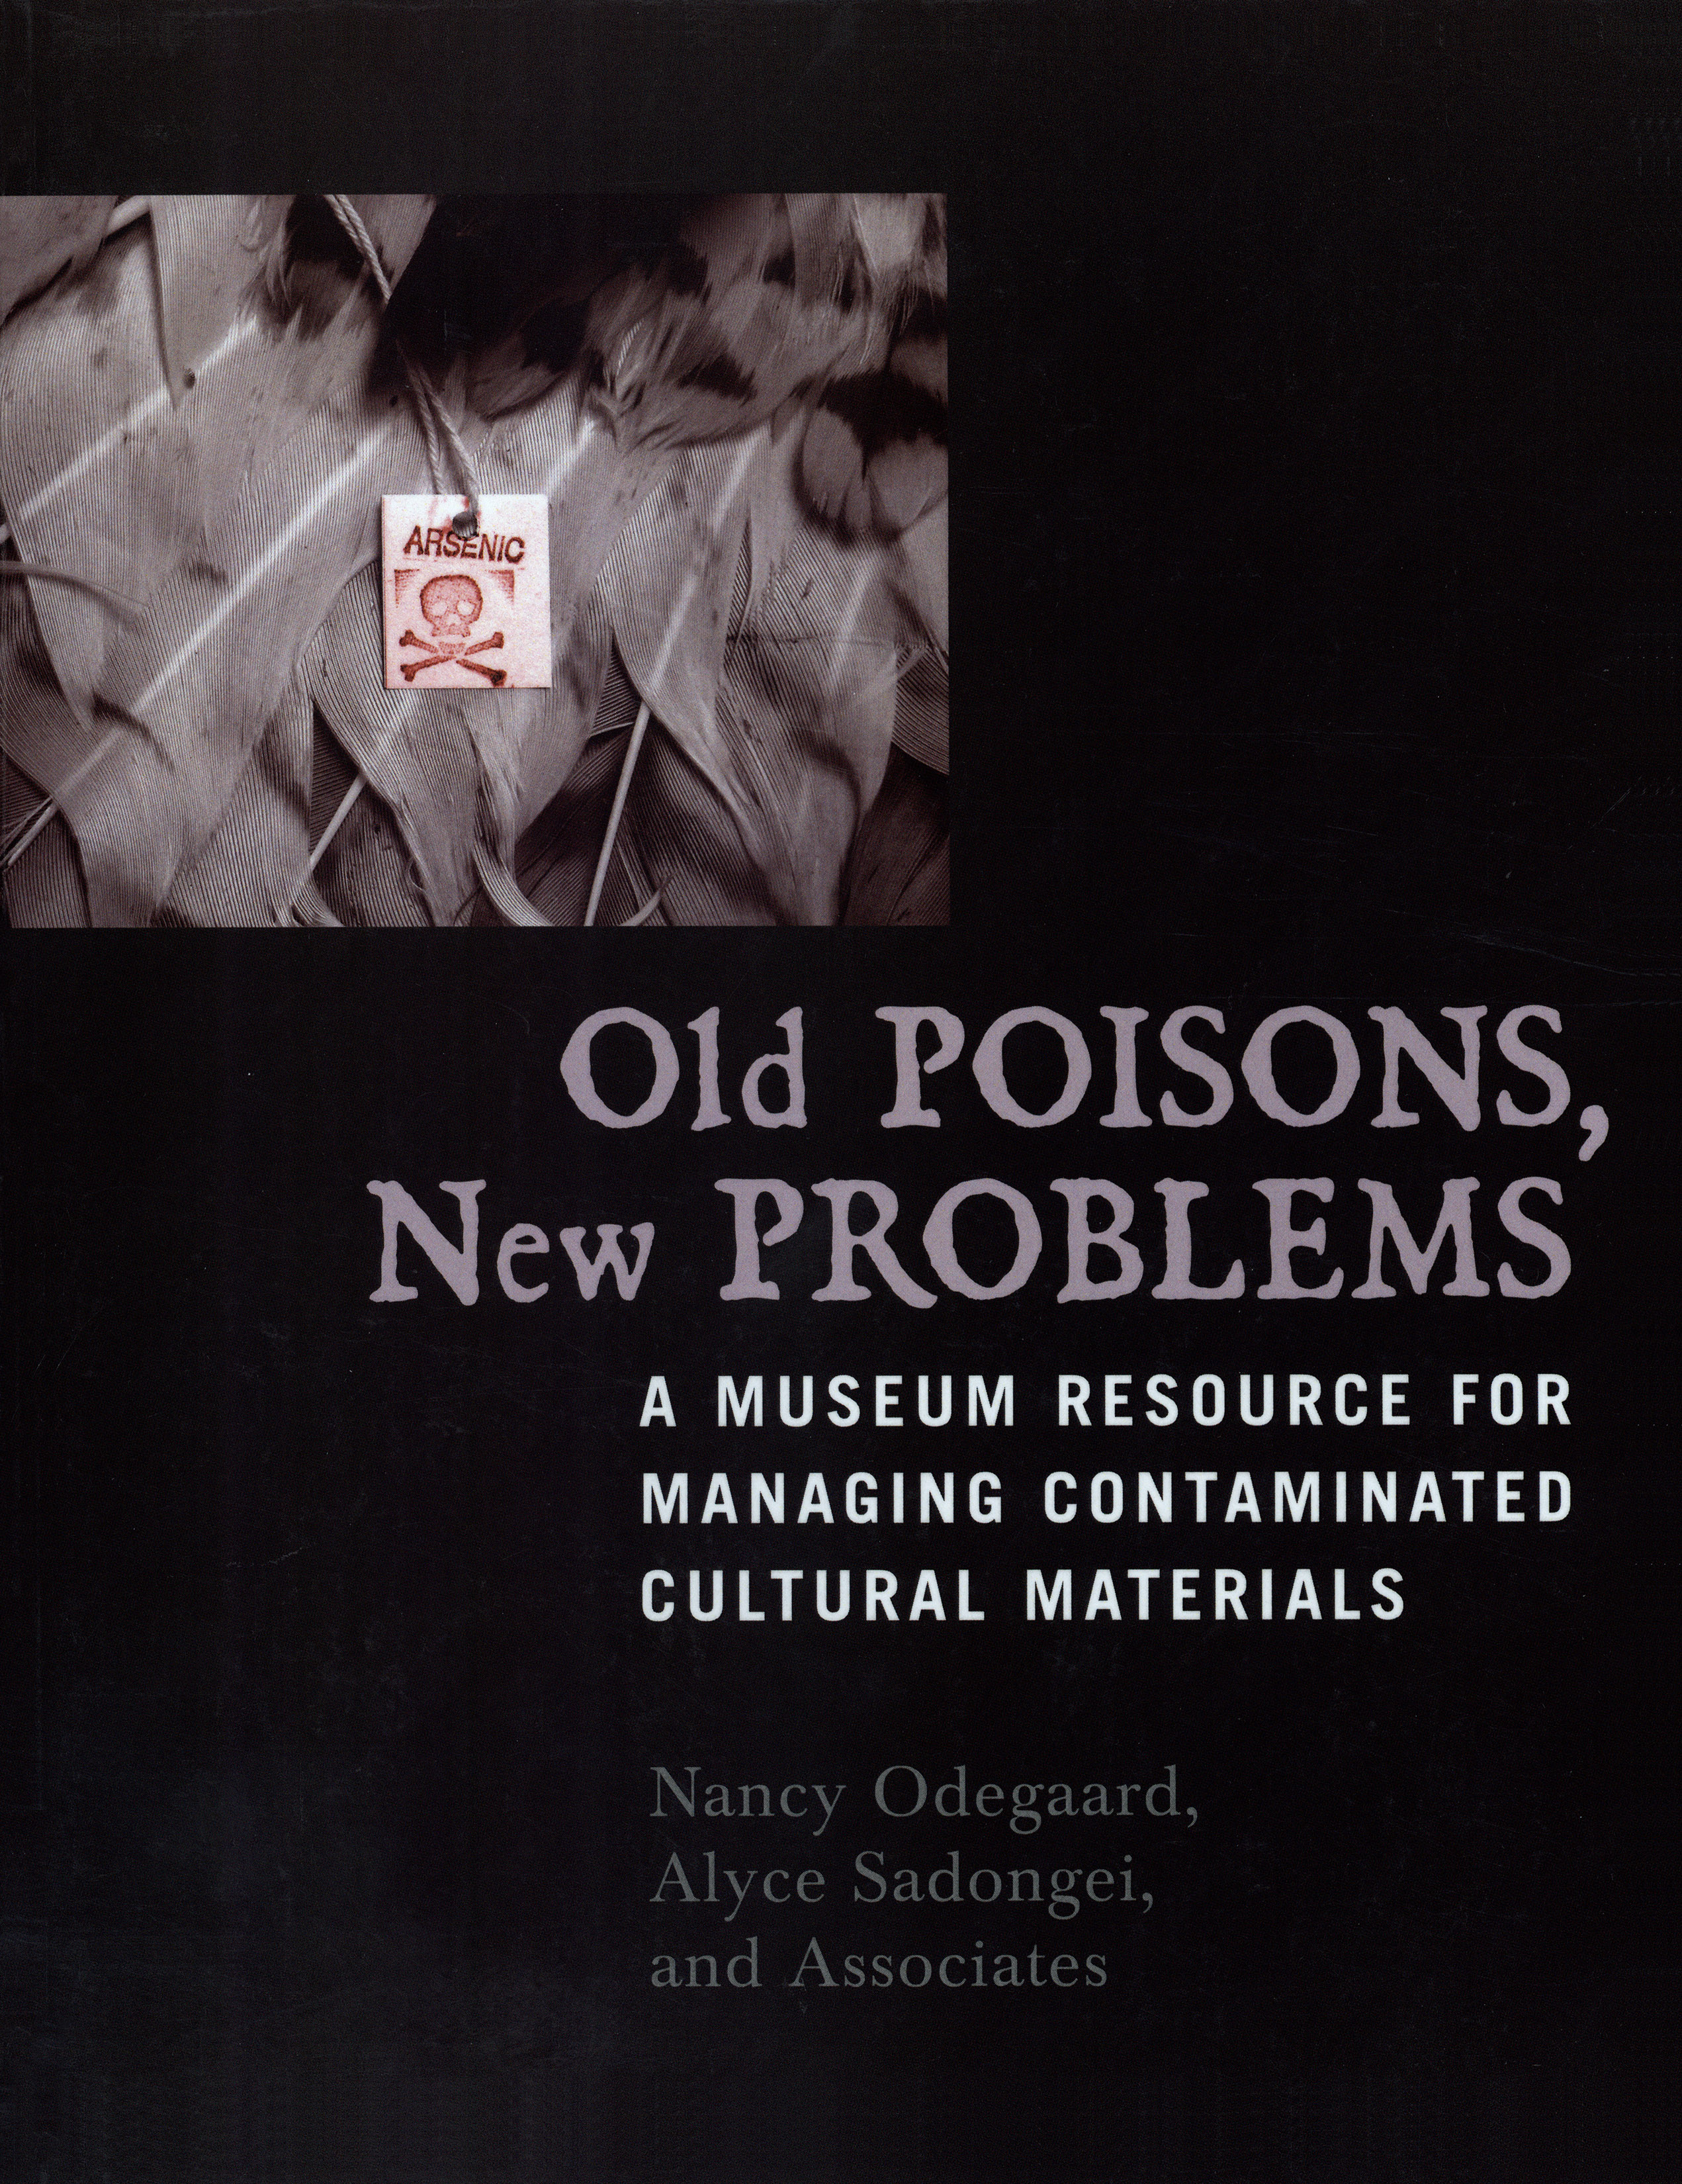 Old Poisons, New Problems: A Museum Resource for Managing Contaminated Cultural Materials